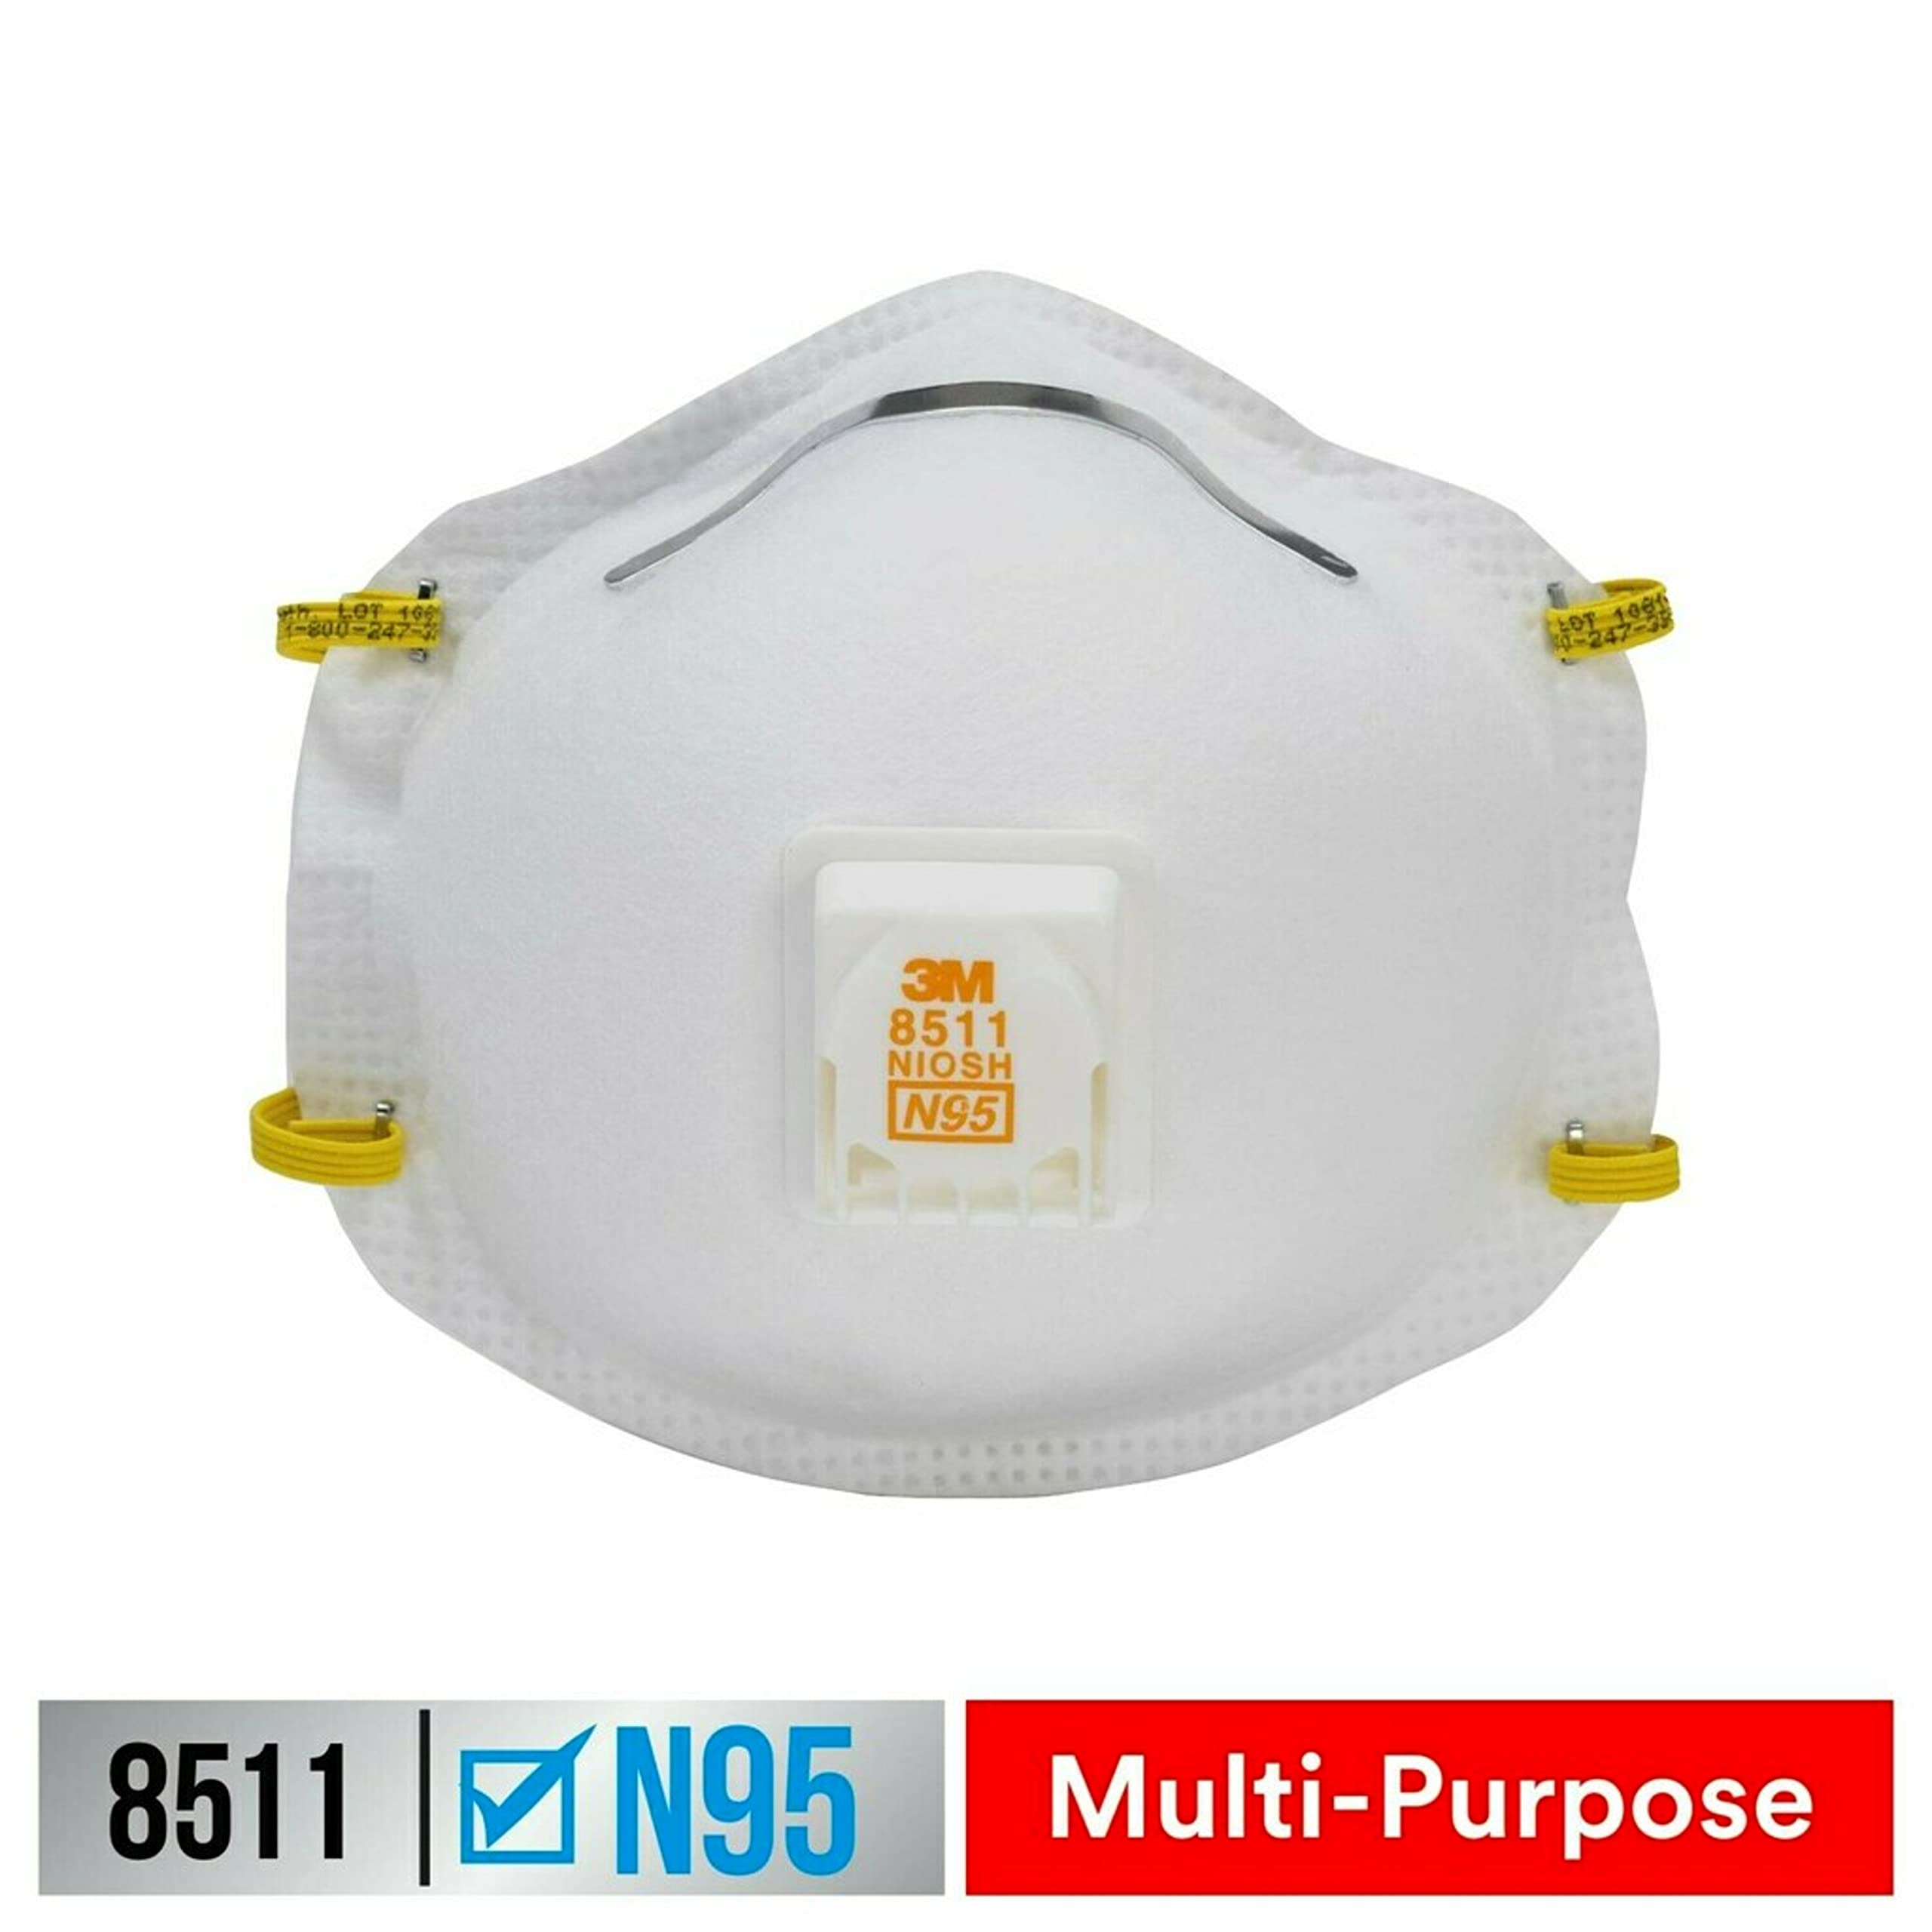 3M Safety Bundle: Pro-Protect Hearing Protector with Bluetooth Technology + 10-Pack Cool Flow Valve N95 Respirator 8511 + 1-Pair Safety Eyewear